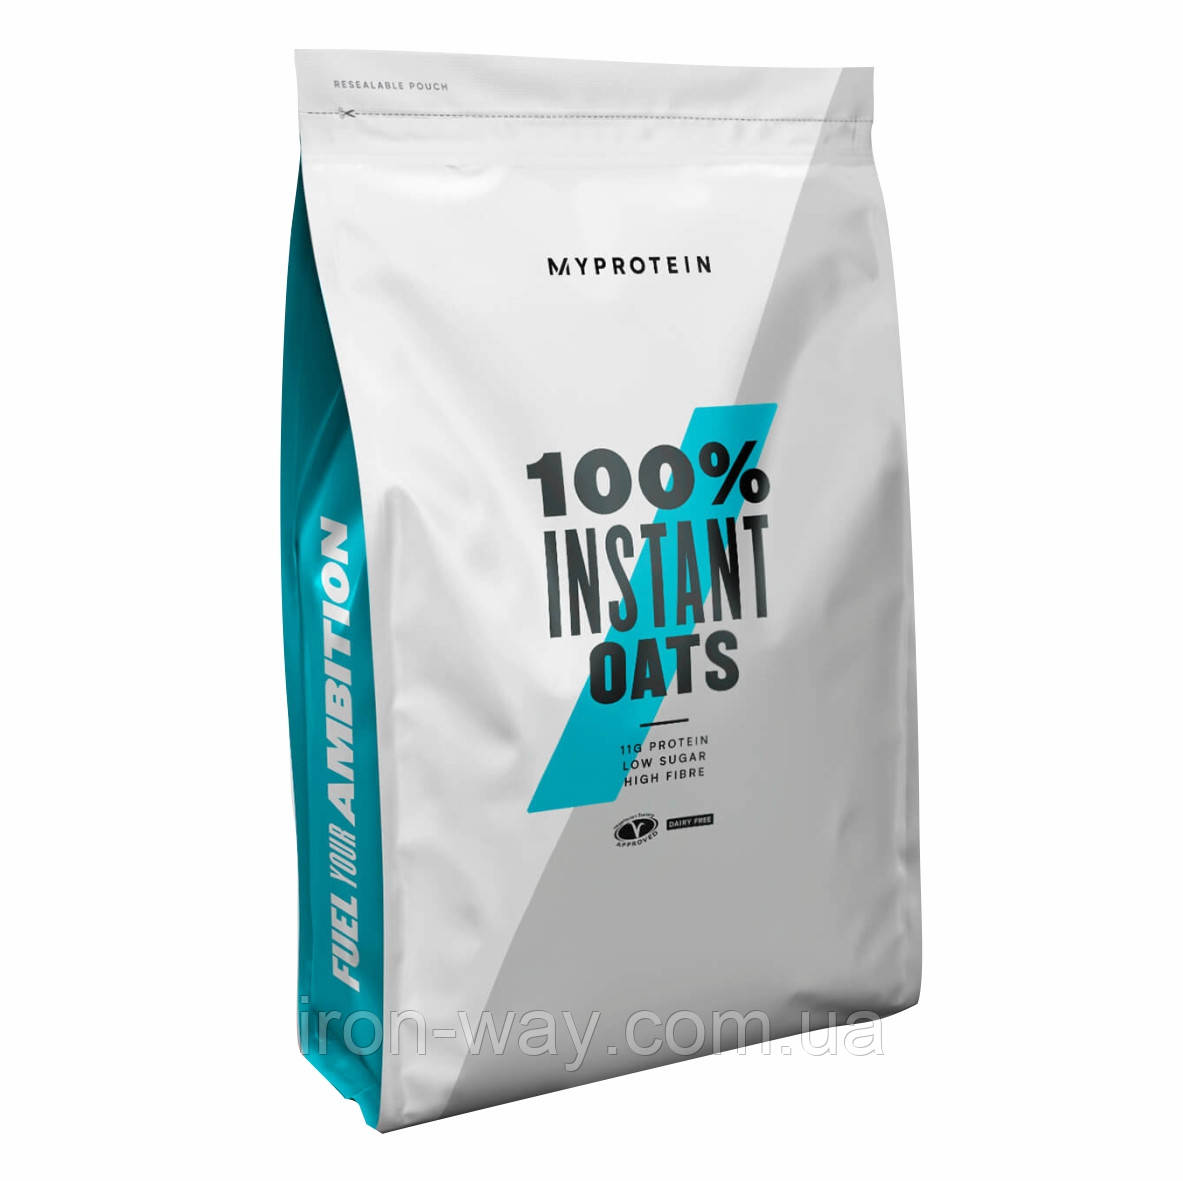 Myprotein Instant Oats 2500g Chocolate smooth